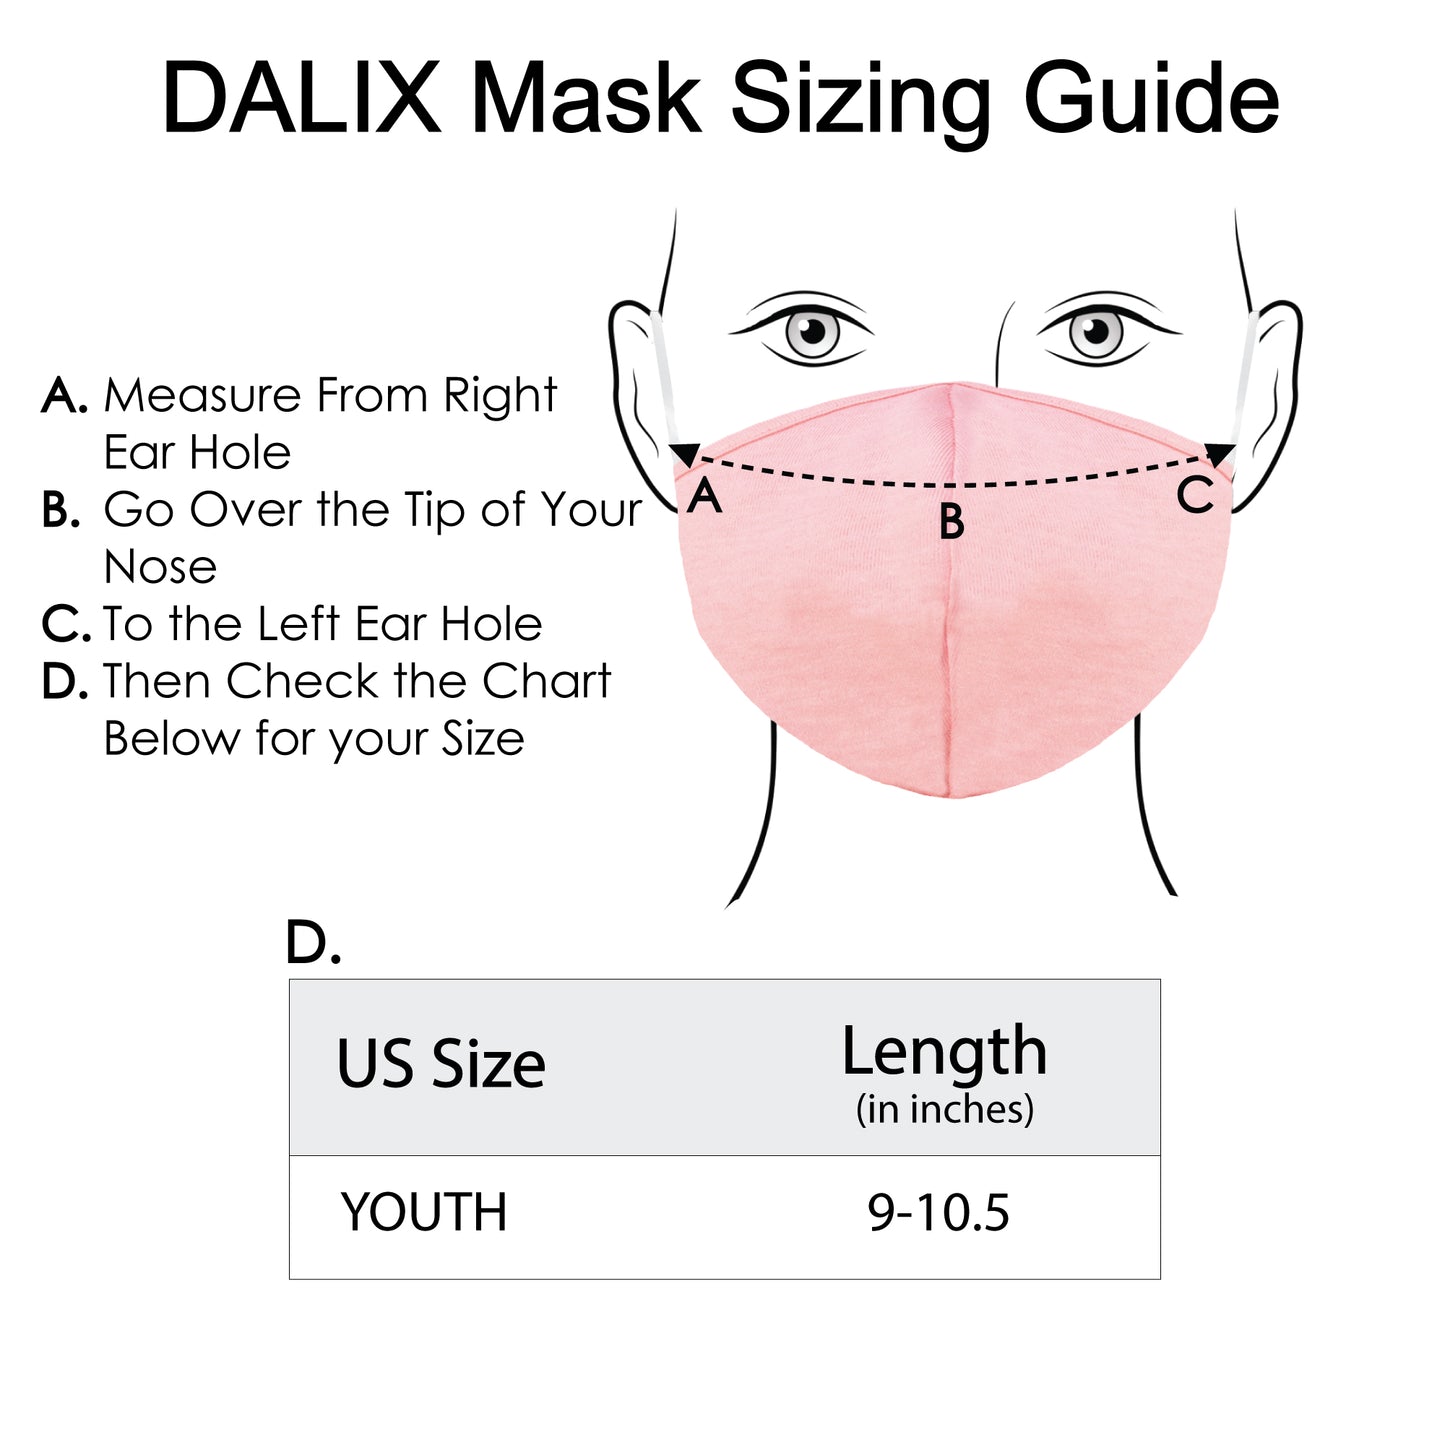 Dalix Kids Cotton Face Mask Reuseable Washable Made in USA - XXS-XS Size 3 Pack